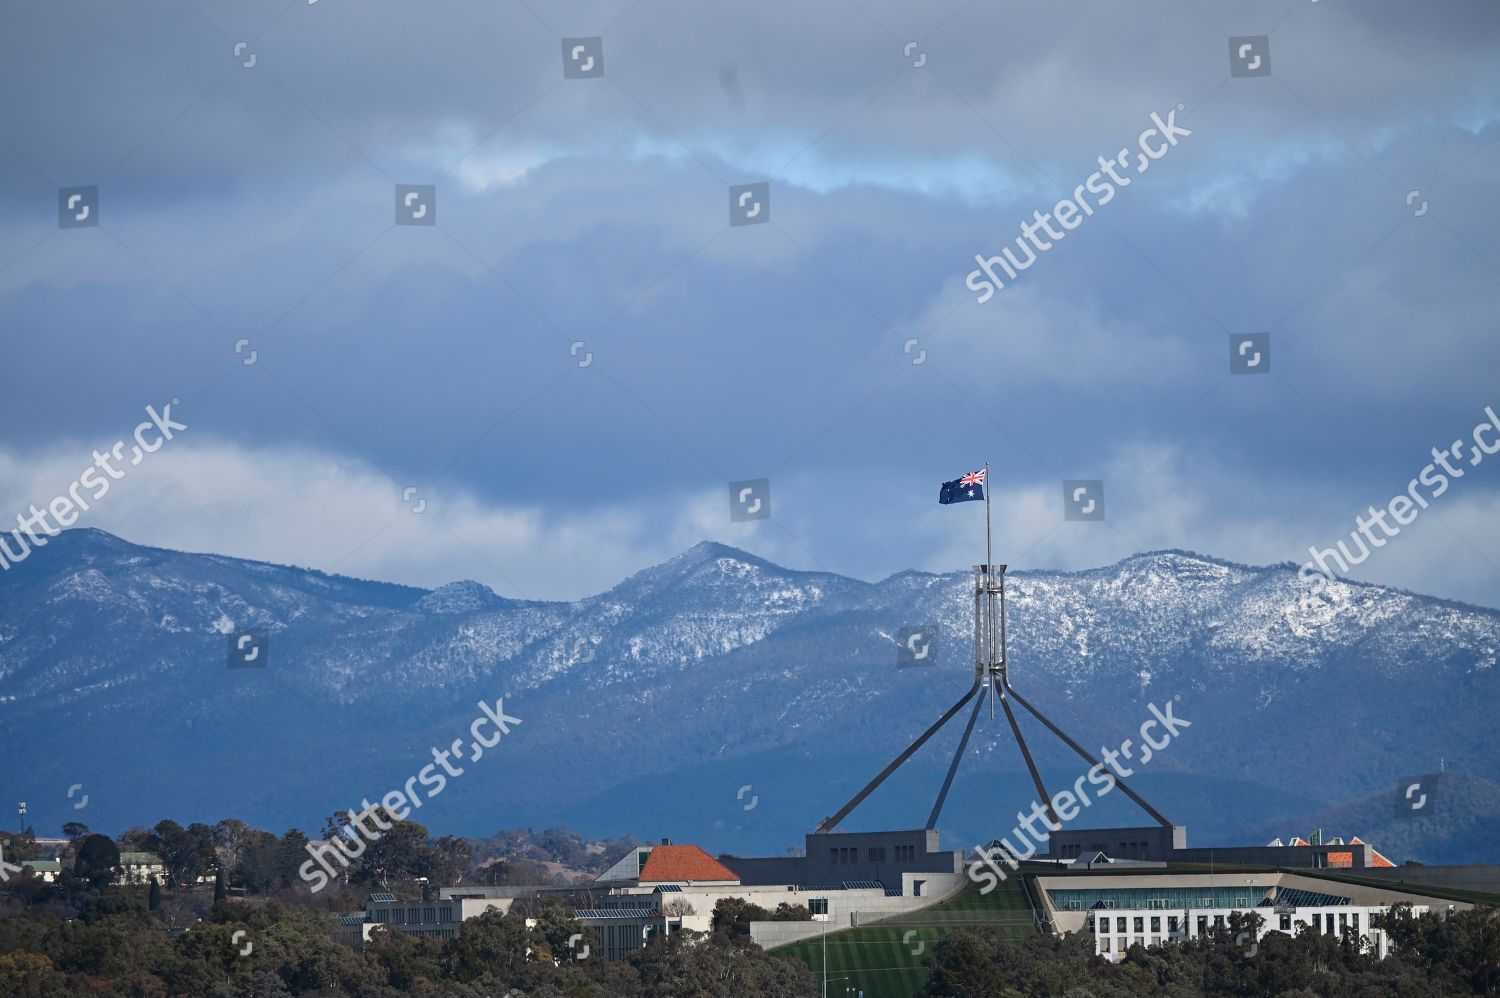 View Parliament House Canberra Pictured Front Snowcovered Redakcni Stock Fotografie Stock Snimek Shutterstock